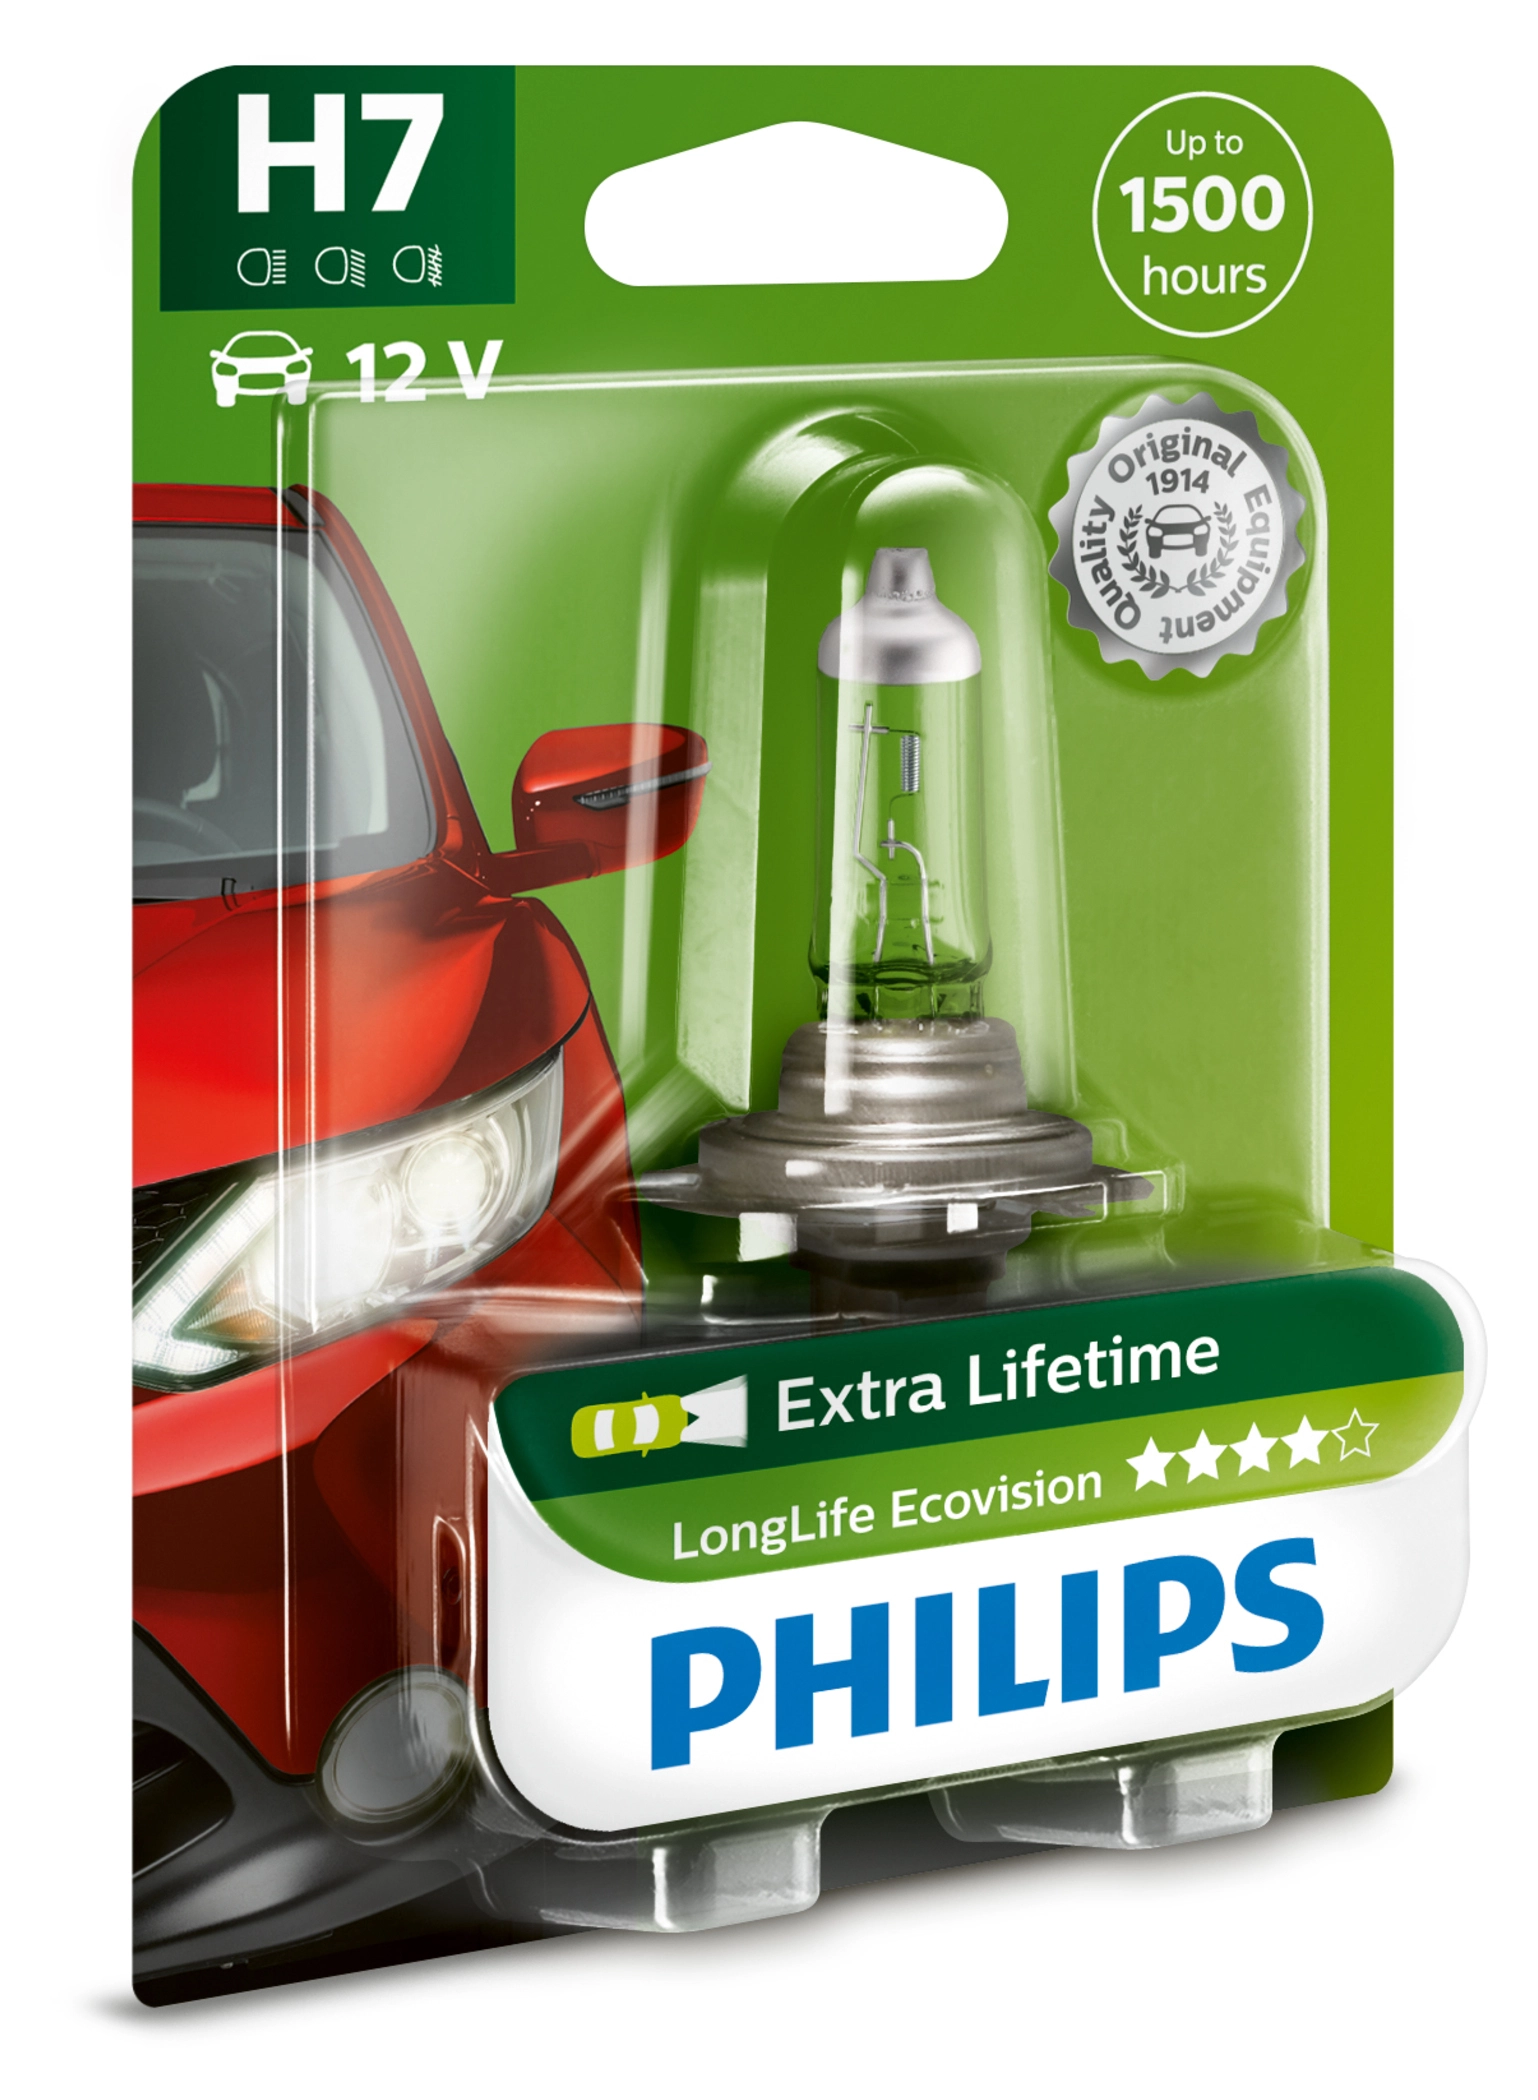 Philips PHILIPS LONGLIFE ECOVISION H7 55W